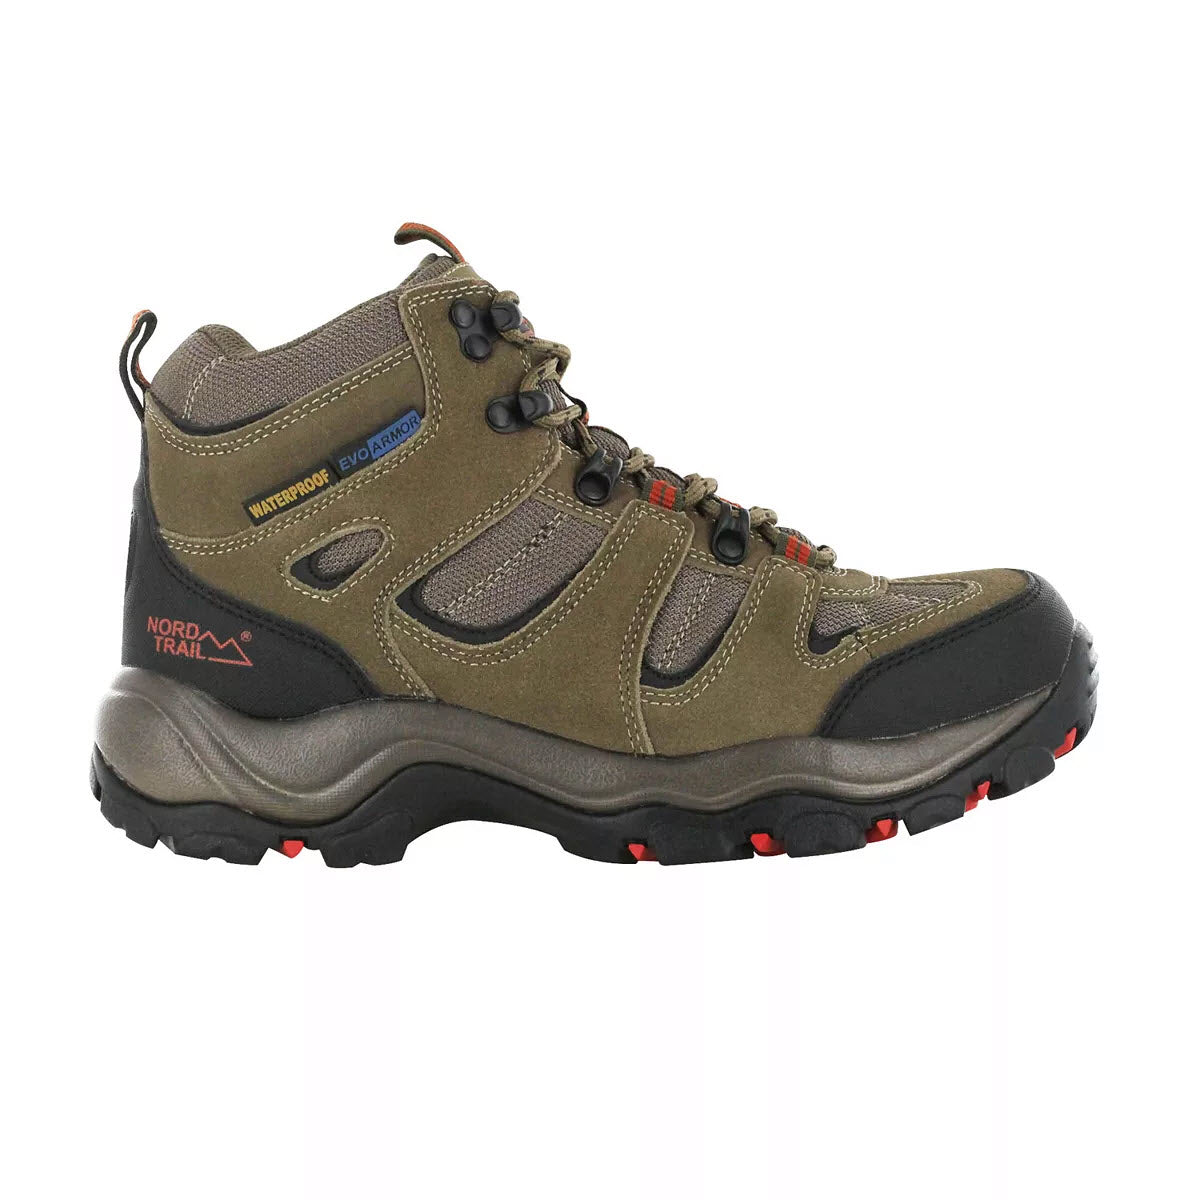 Men's olive green hiking boot with red detailing, labeled "waterproof" and "NORD TRAIL" on a white background.